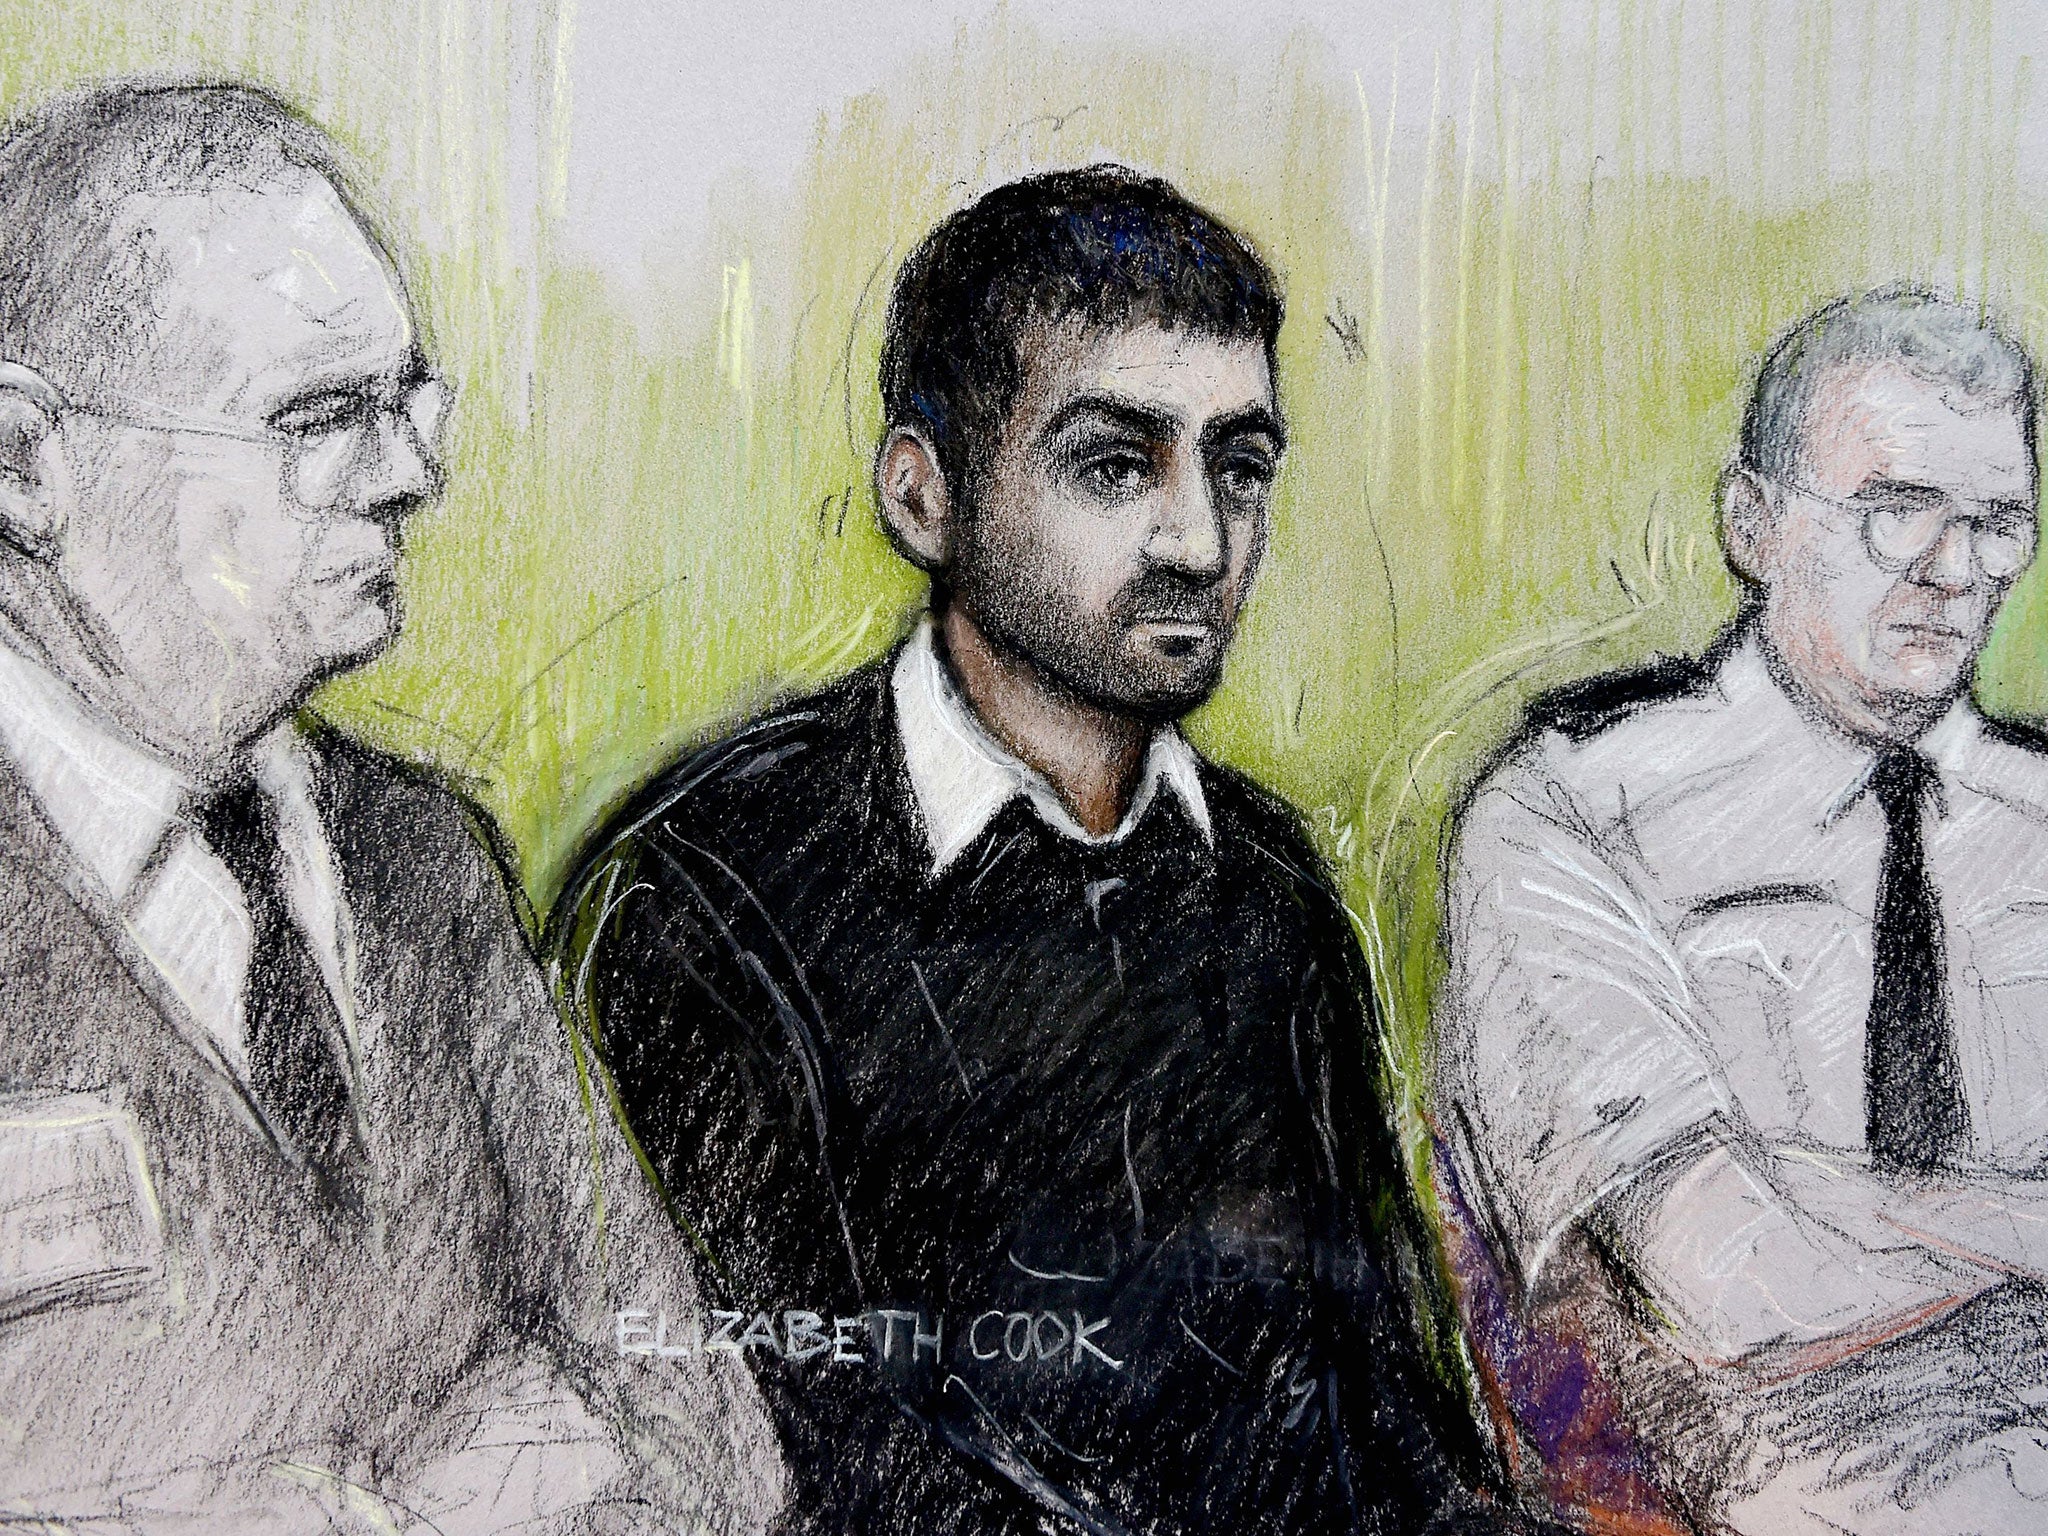 Law student Erol Incedal, centre, claims he was plotting a robbery and not terror attack